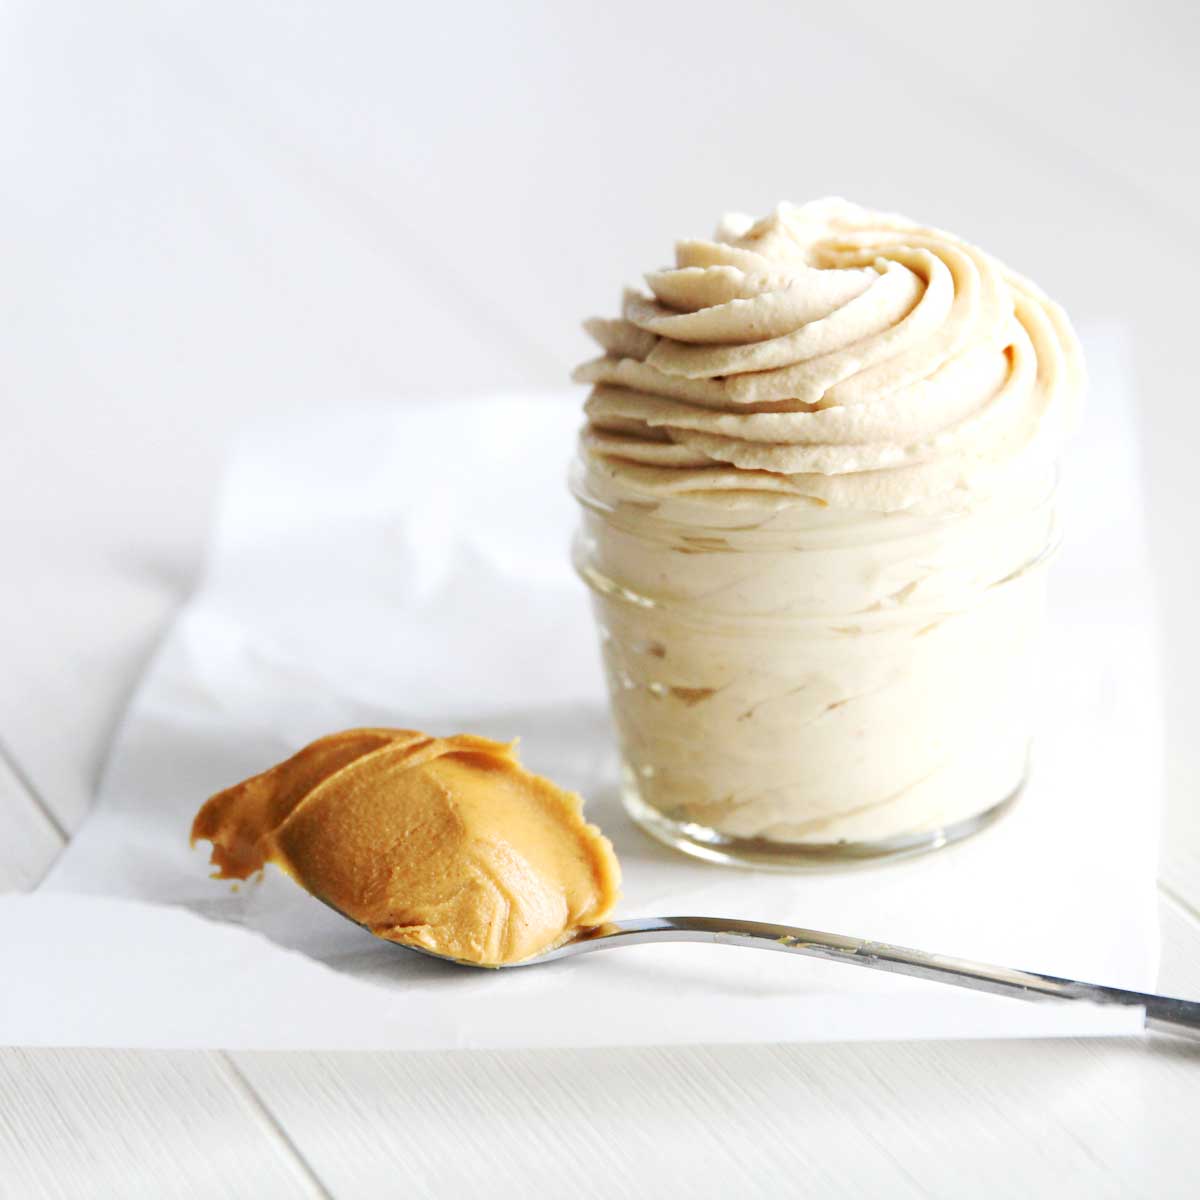 Peanut Butter Whipped Cream Recipe That Tastes Like Reeses Desserts - Whipped Cream Recipes